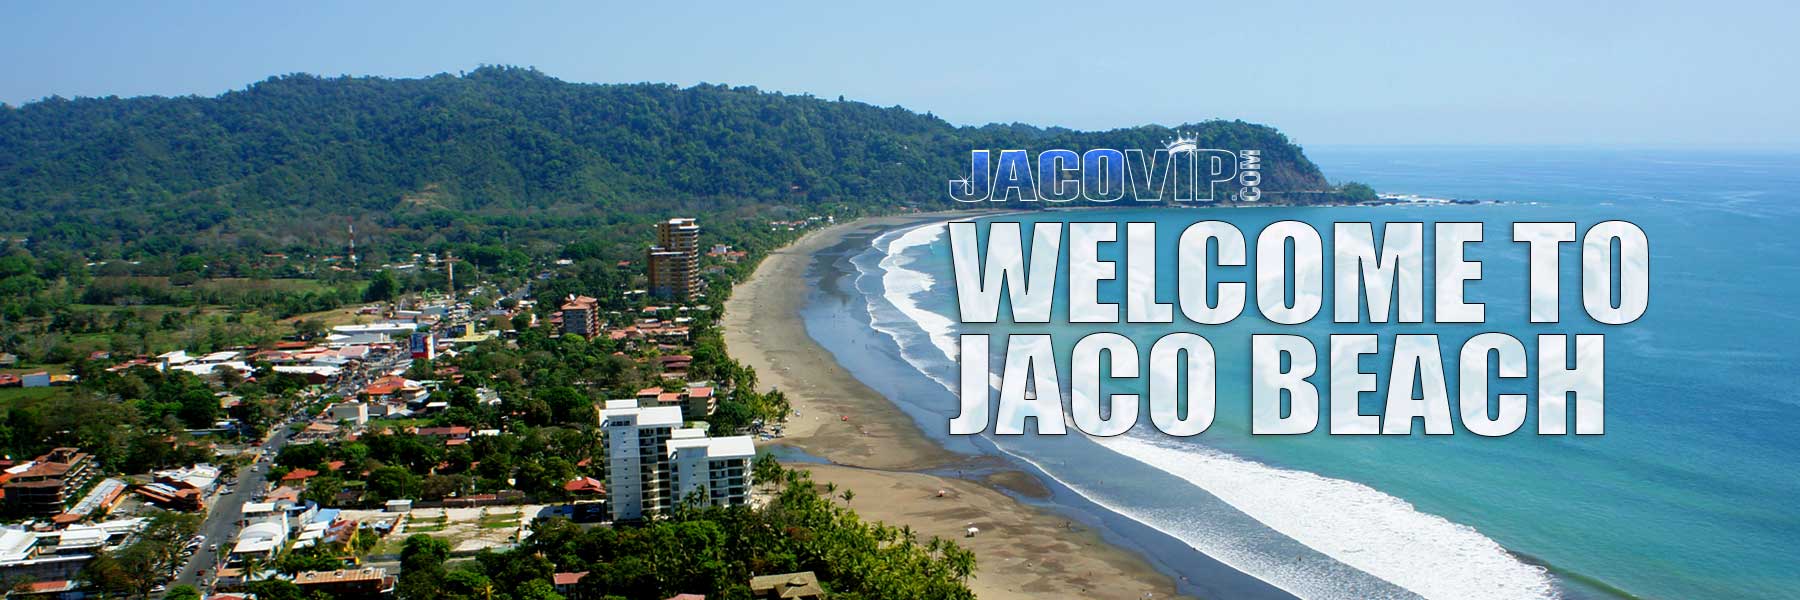 Southern aerial view of Jaco main street and beach in Costa Rica